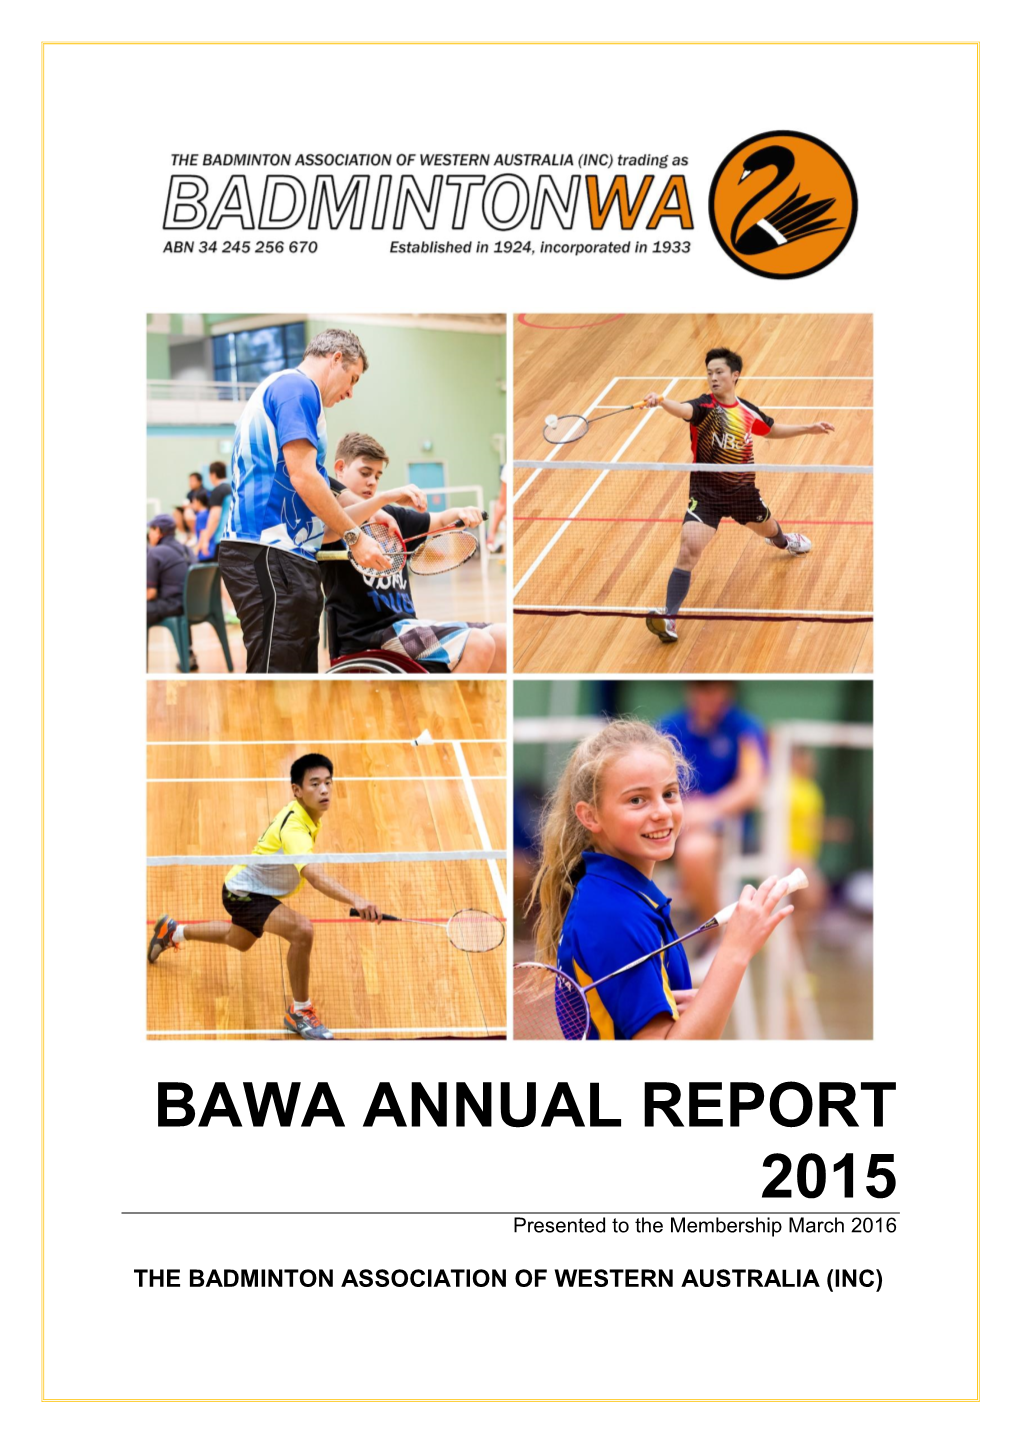 BAWA ANNUAL REPORT 2015 Presented to the Membership March 2016